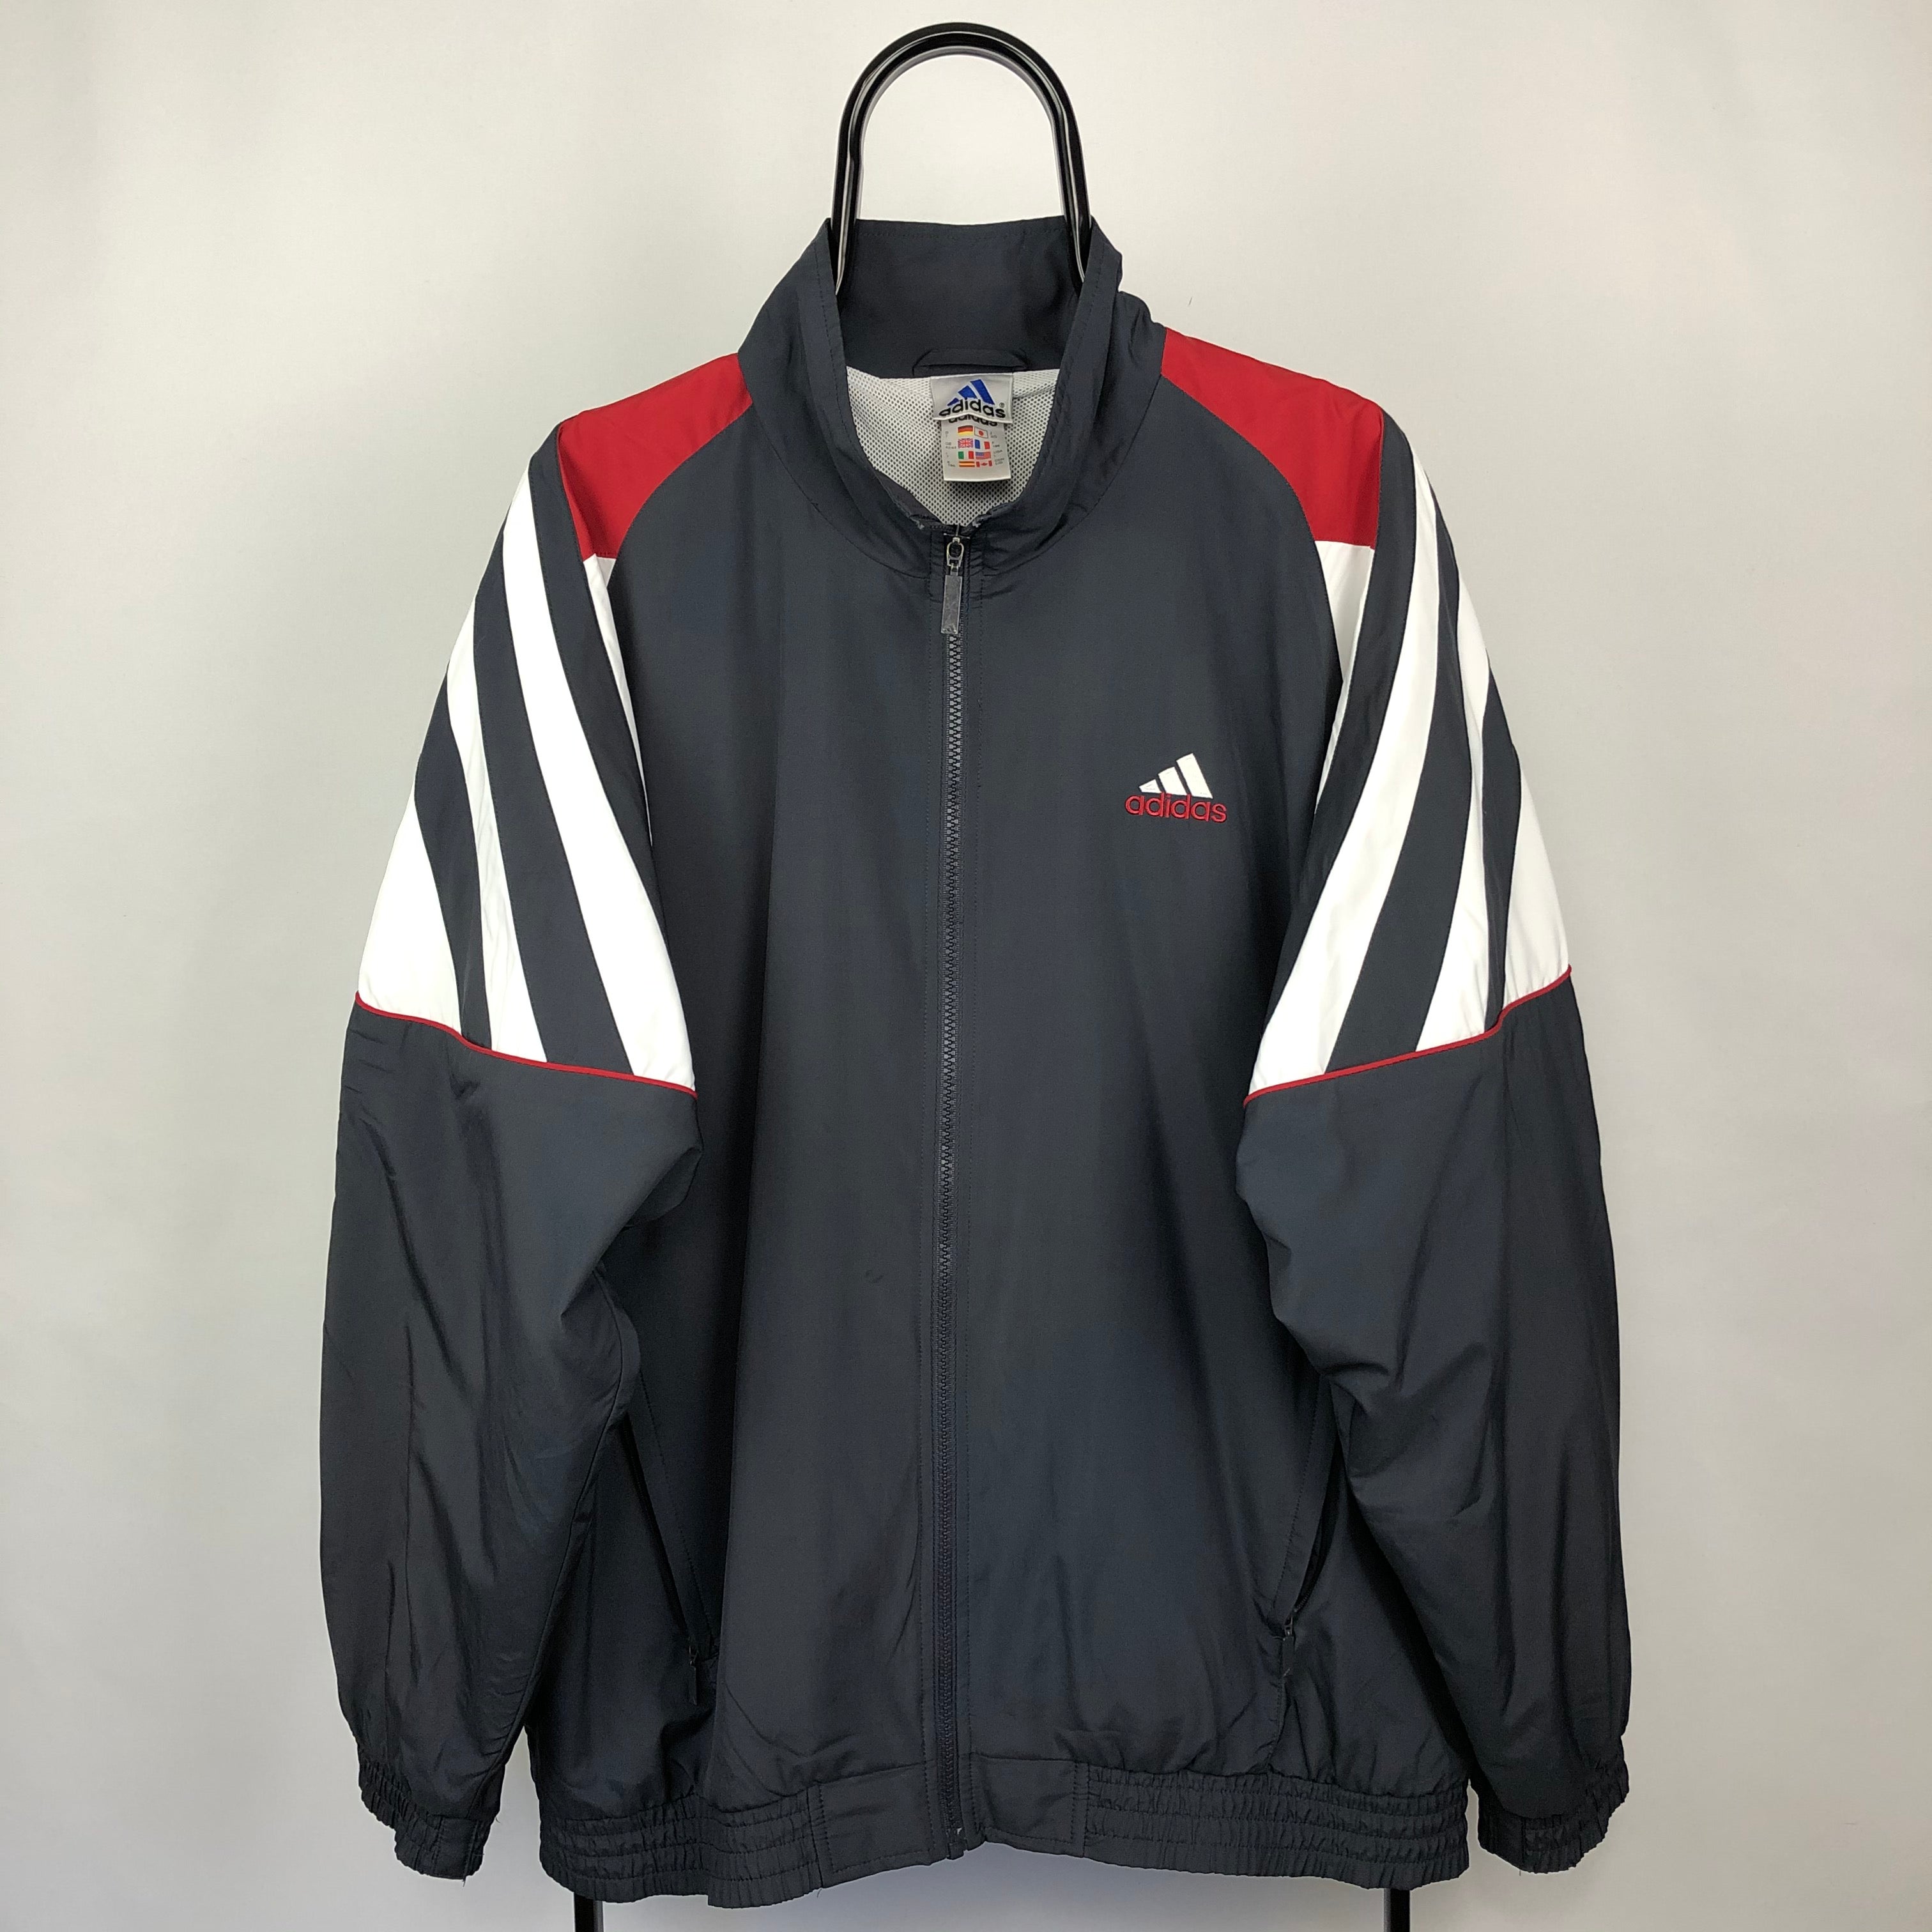 Vintage 90s Adidas Track Jacket in Charcoal/Red/White - Men's Large/Wo ...